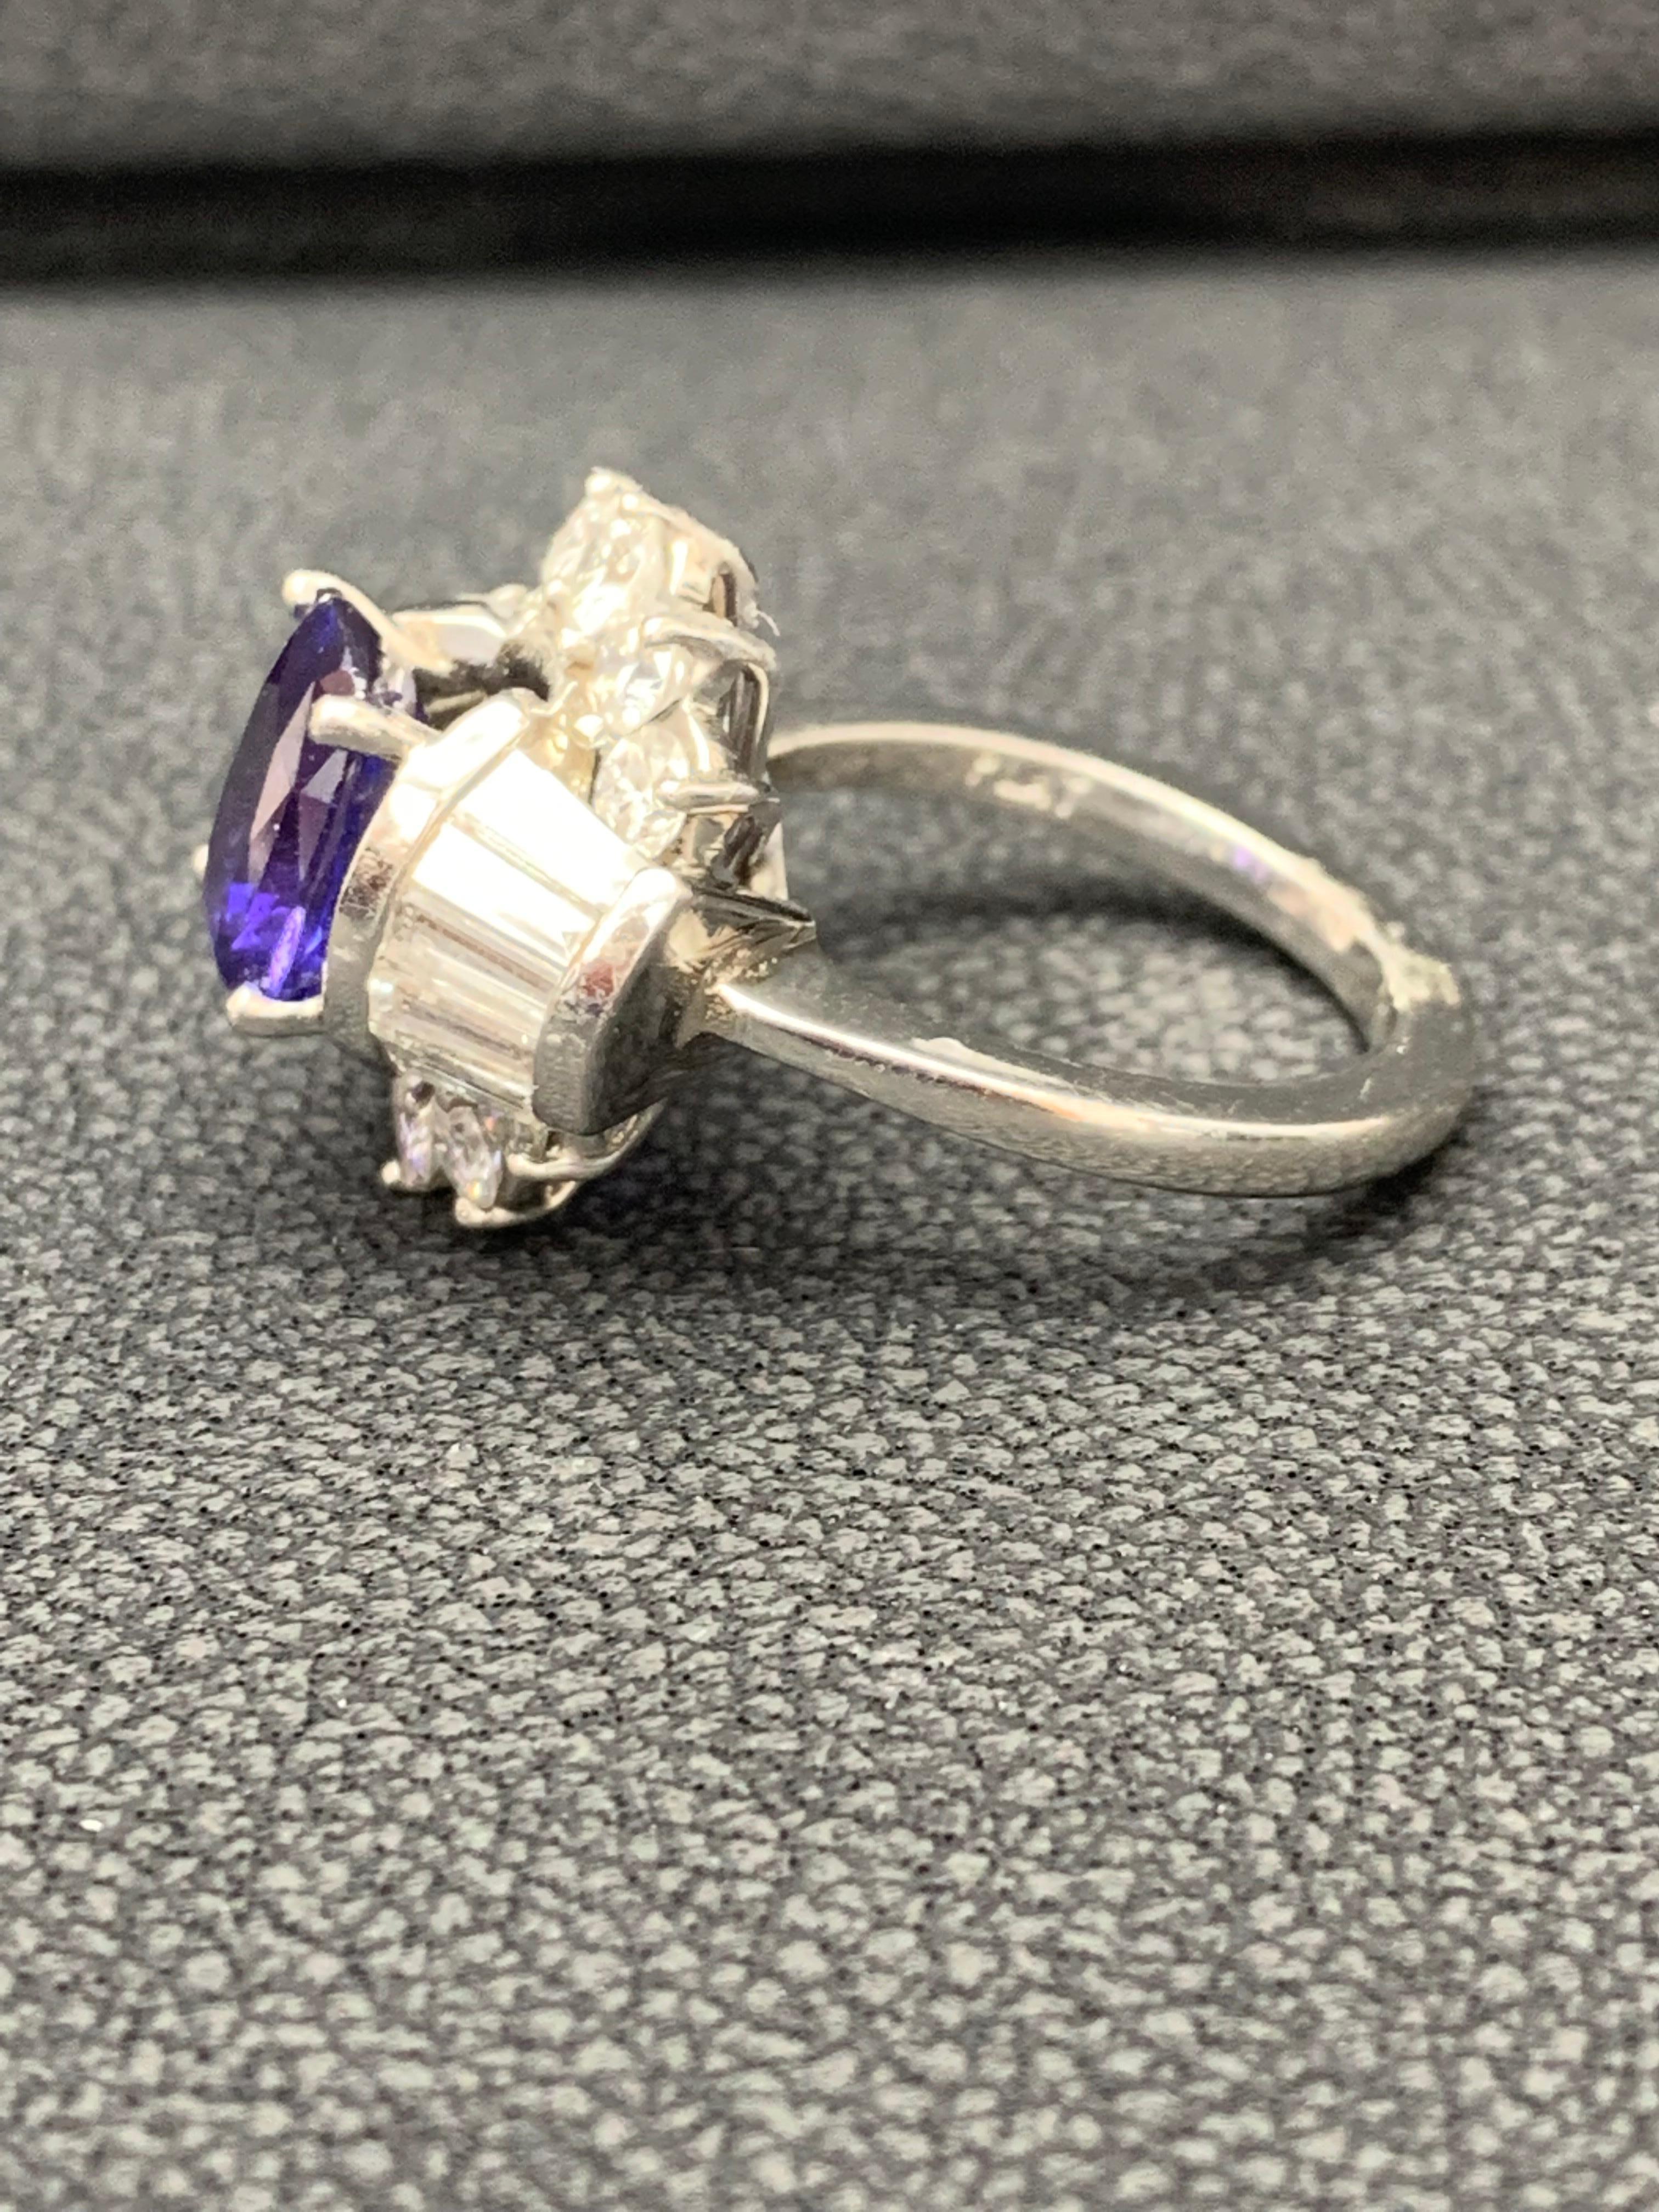 Showcasing a 4.20 carat cushion cut blue sapphire. BLUE color with no indications of heat treatment. Surrounding the sapphire is a row of round and baguette brilliant diamonds, in a diamond encrusted mounting made in platinum. Accent diamonds weigh